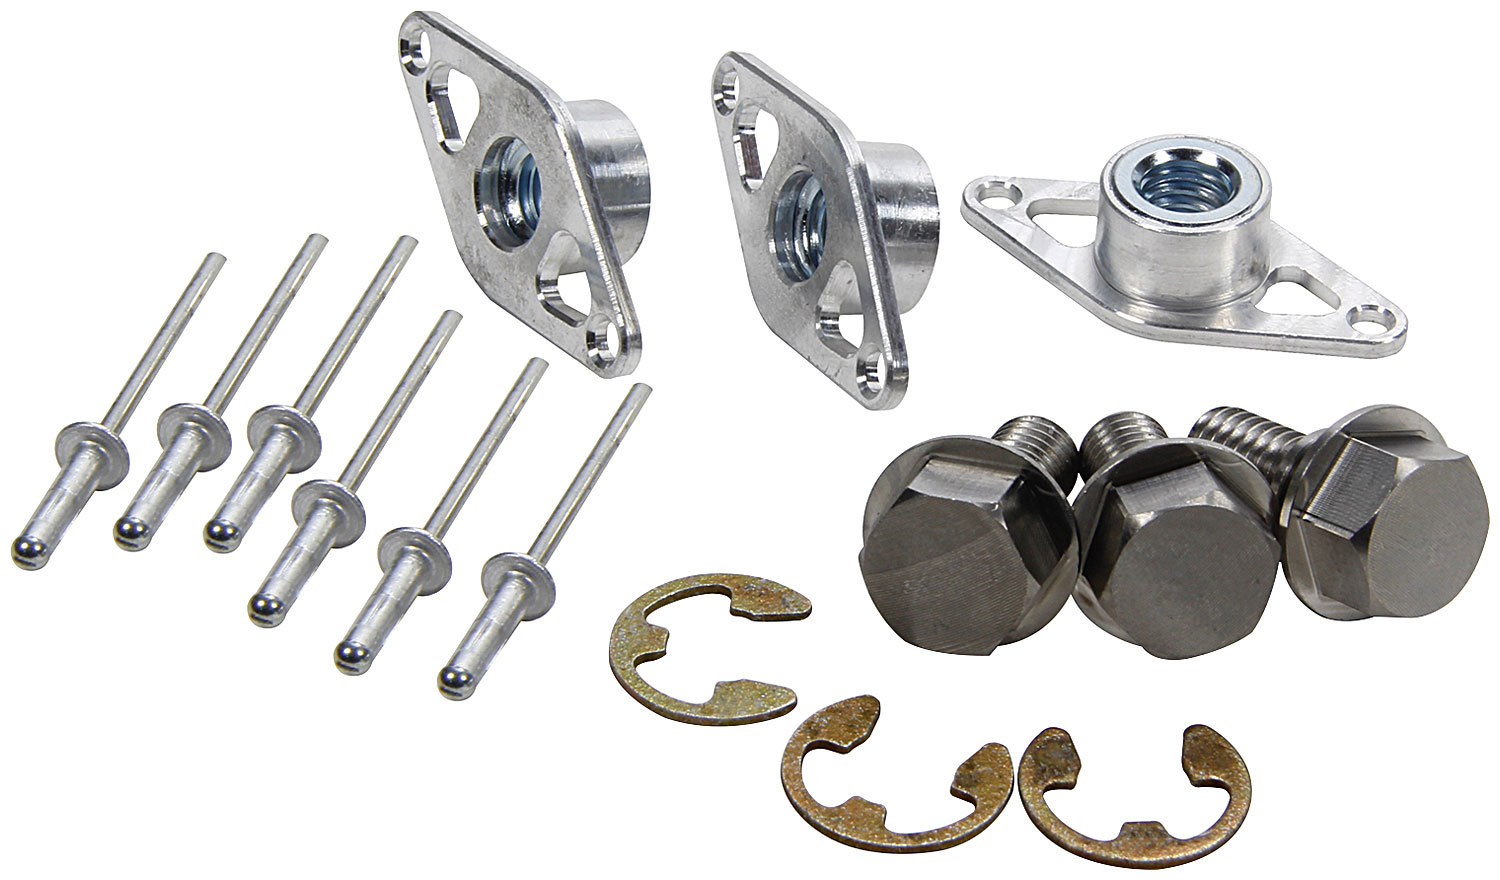 Allstar Performance 44265 Mud Cover Installation Kit, Screw-In Inserts / Rivets Included, 1-3/8 in Spring, Stainless, Kit